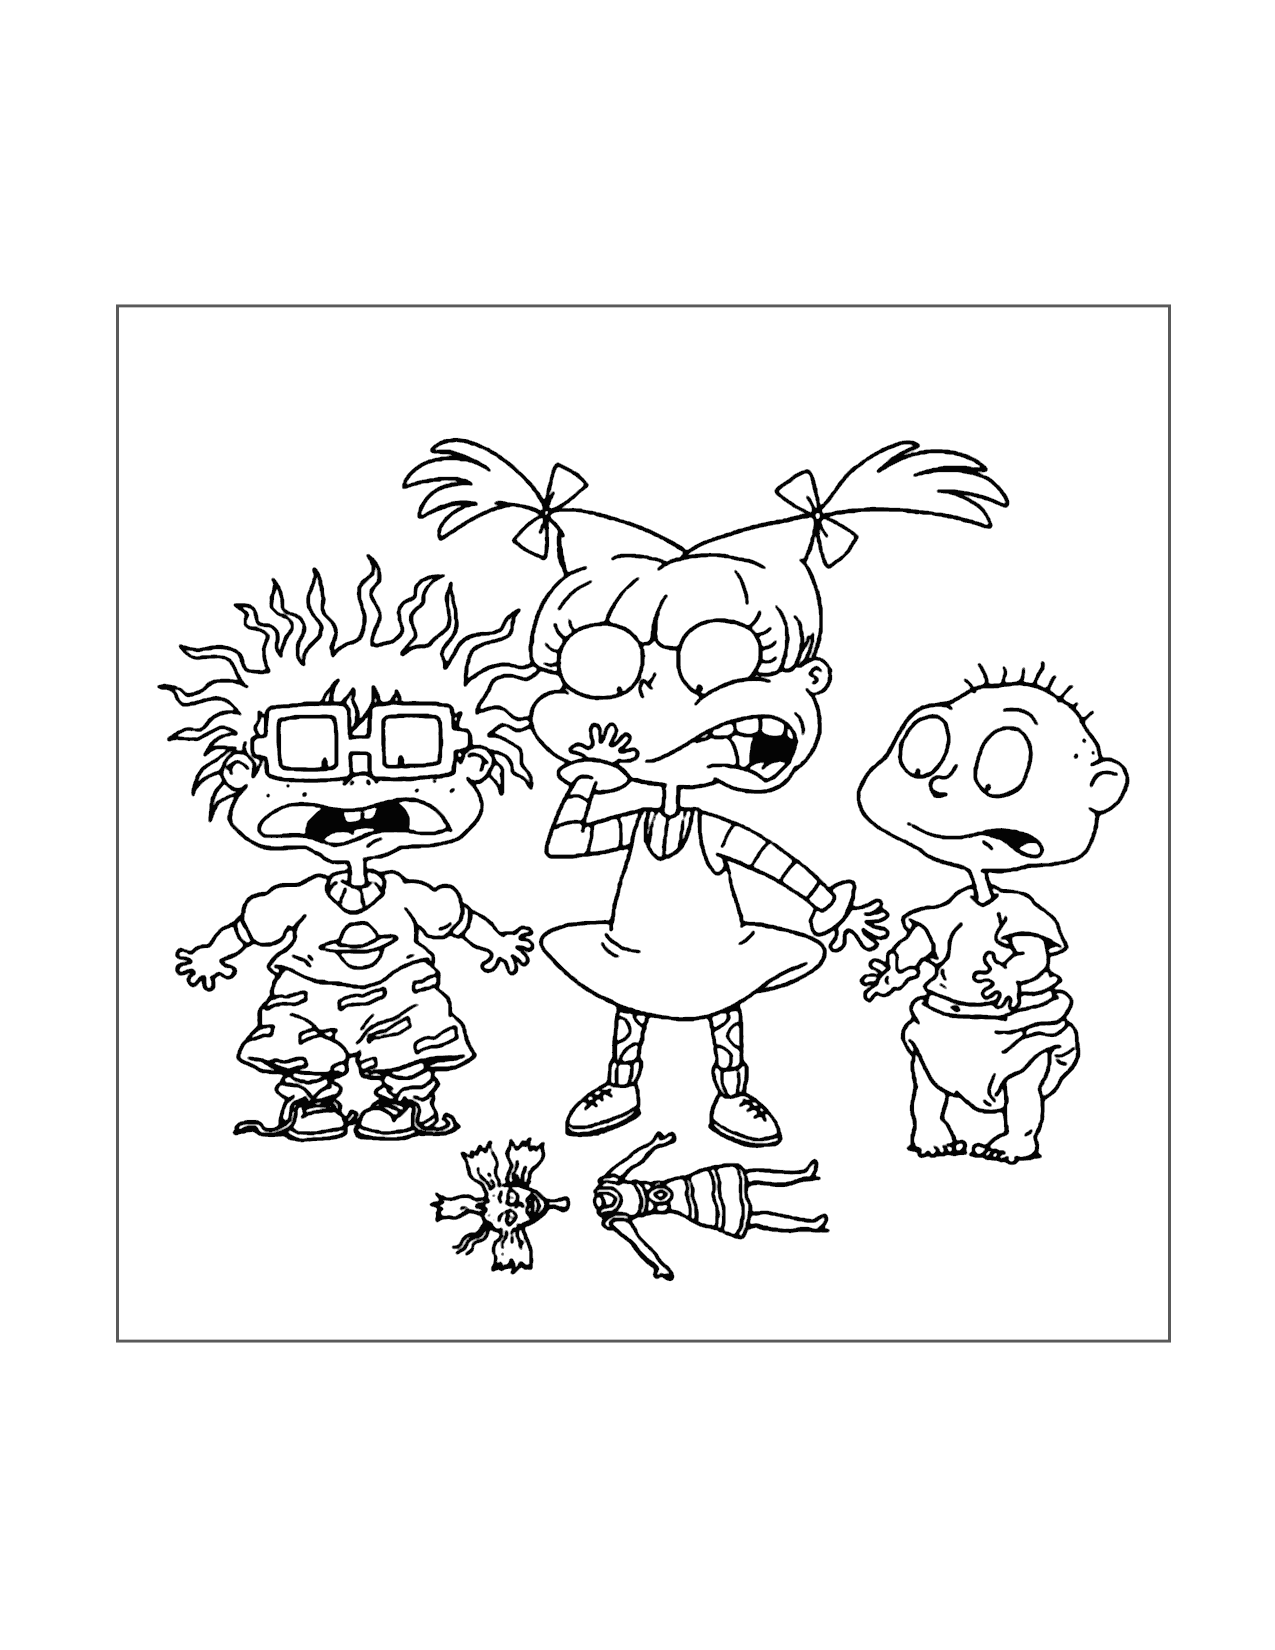 Cynthia Loses Her Head Rugrats Coloring Page